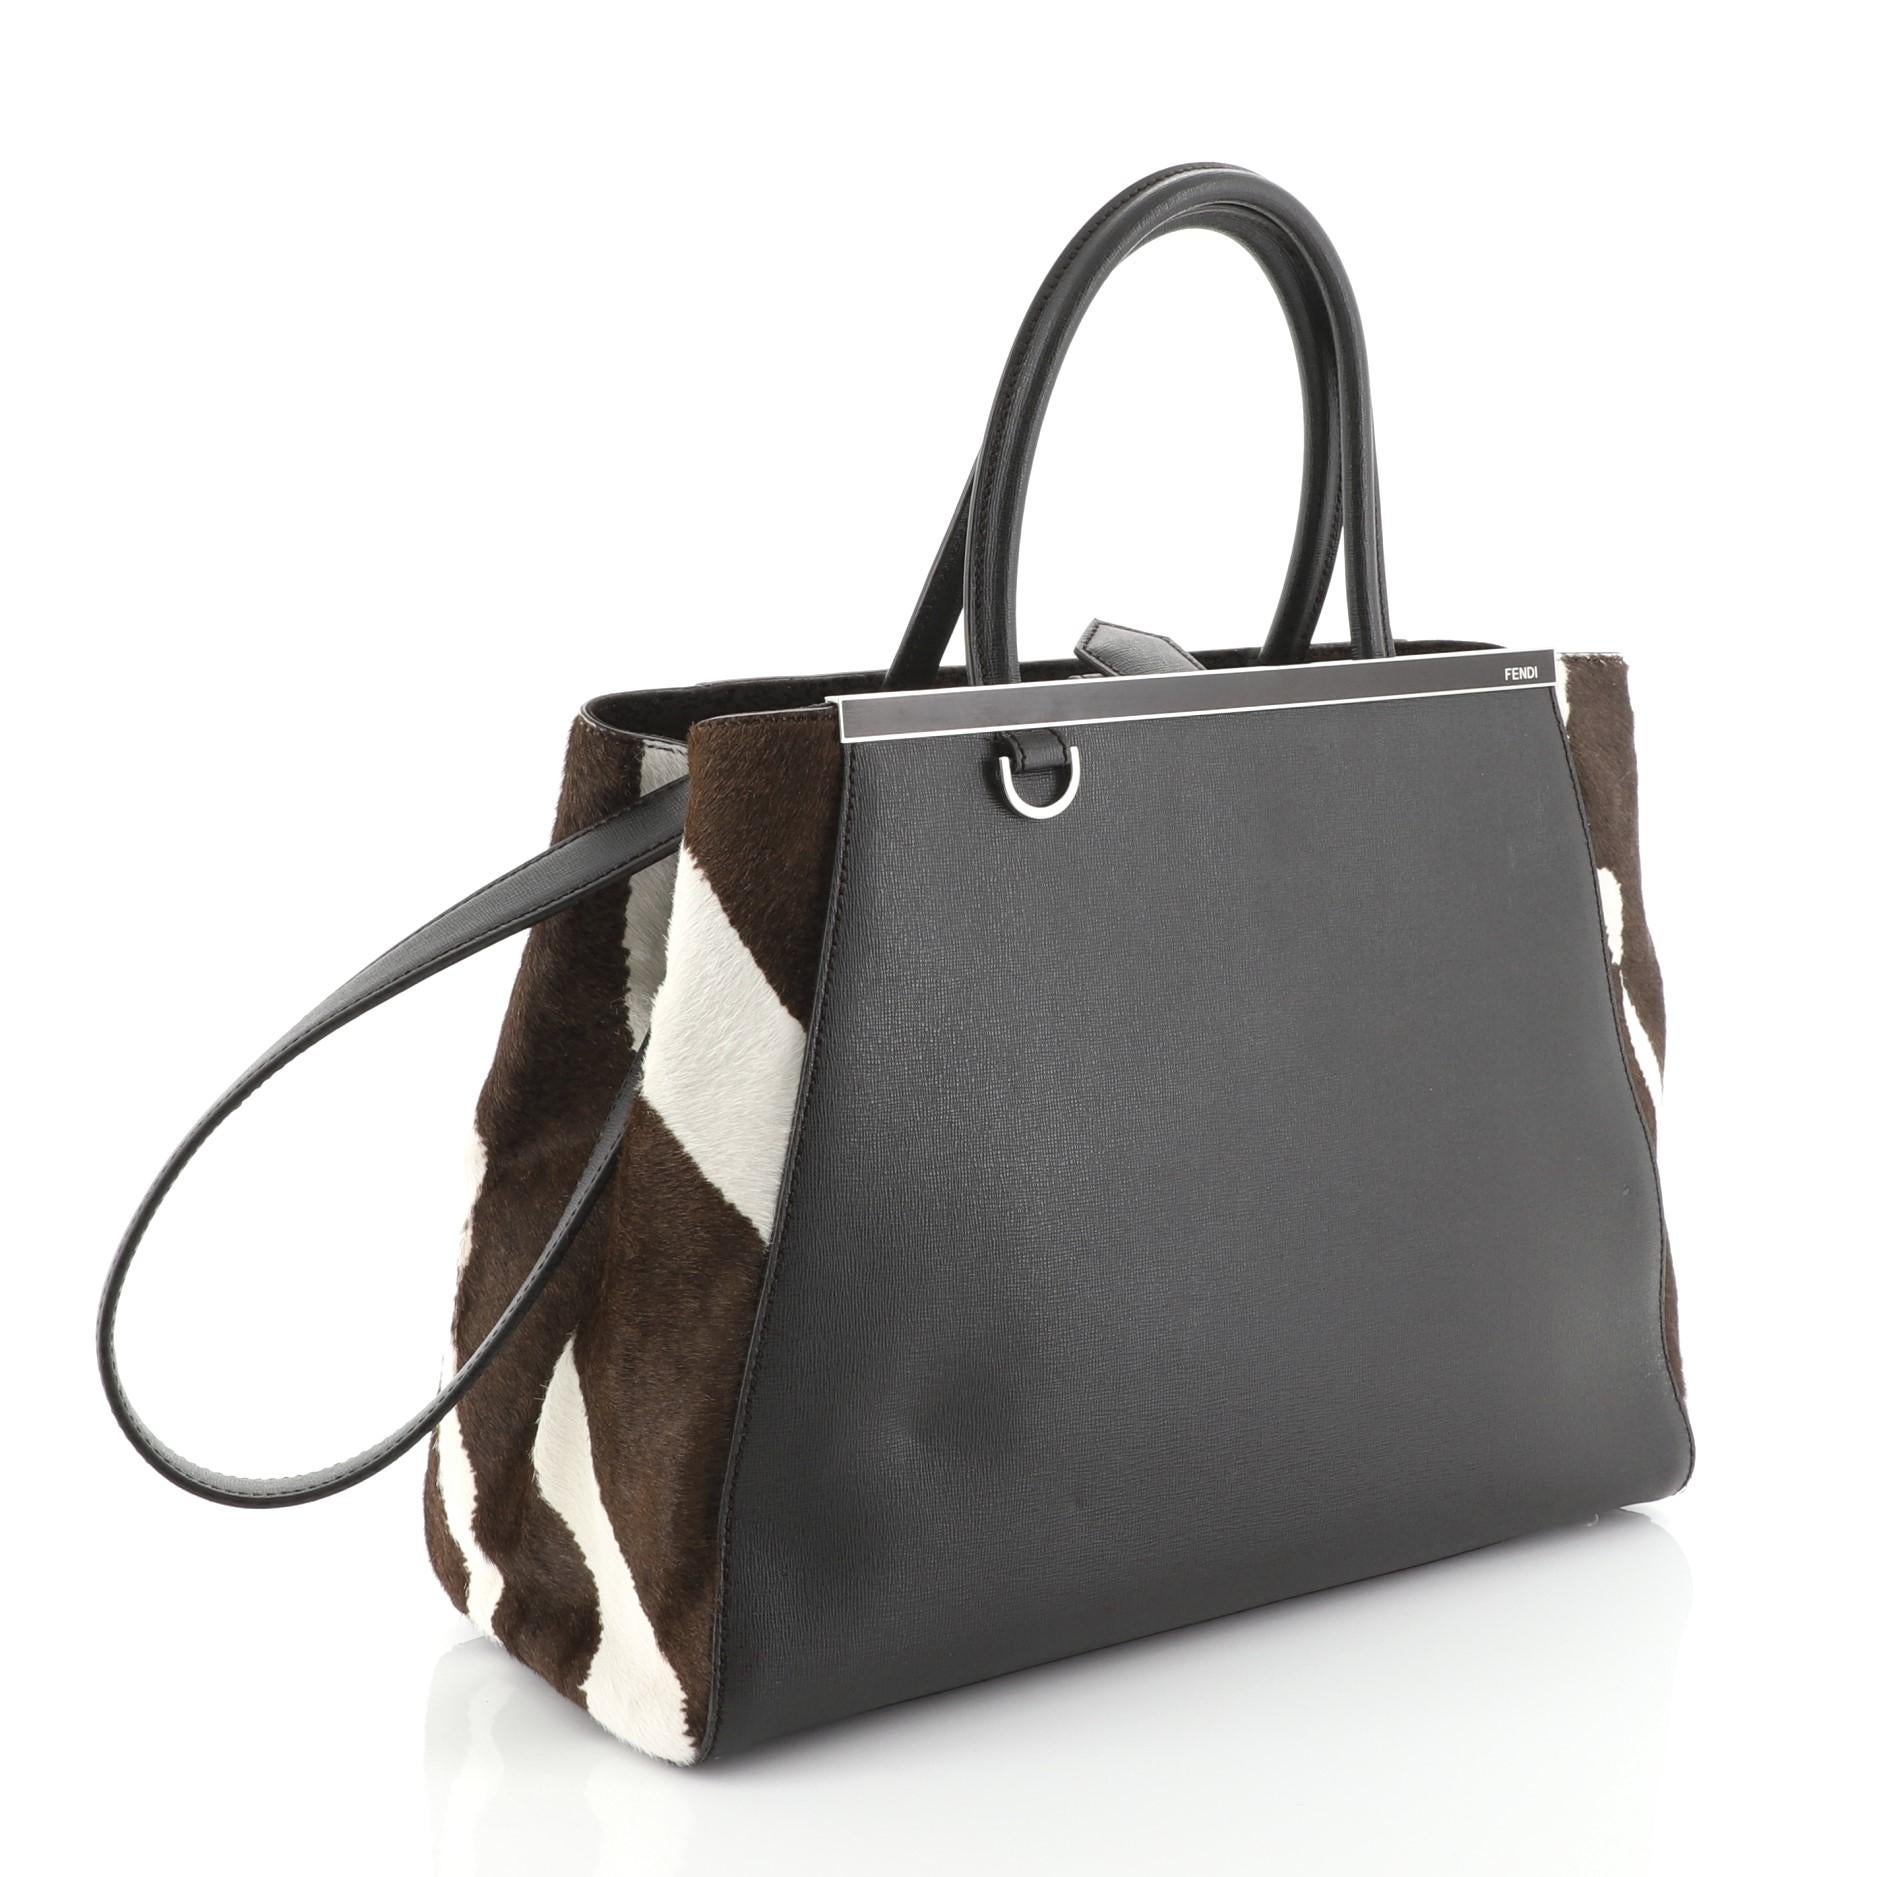 This Fendi 2Jours Bag Pony Hair and Leather Large, crafted in brown leather and brown pony hair, features a top bar with the Fendi brand name, dual rolled leather handles, and silver-tone hardware. Its snap button closure opens to brown fabric